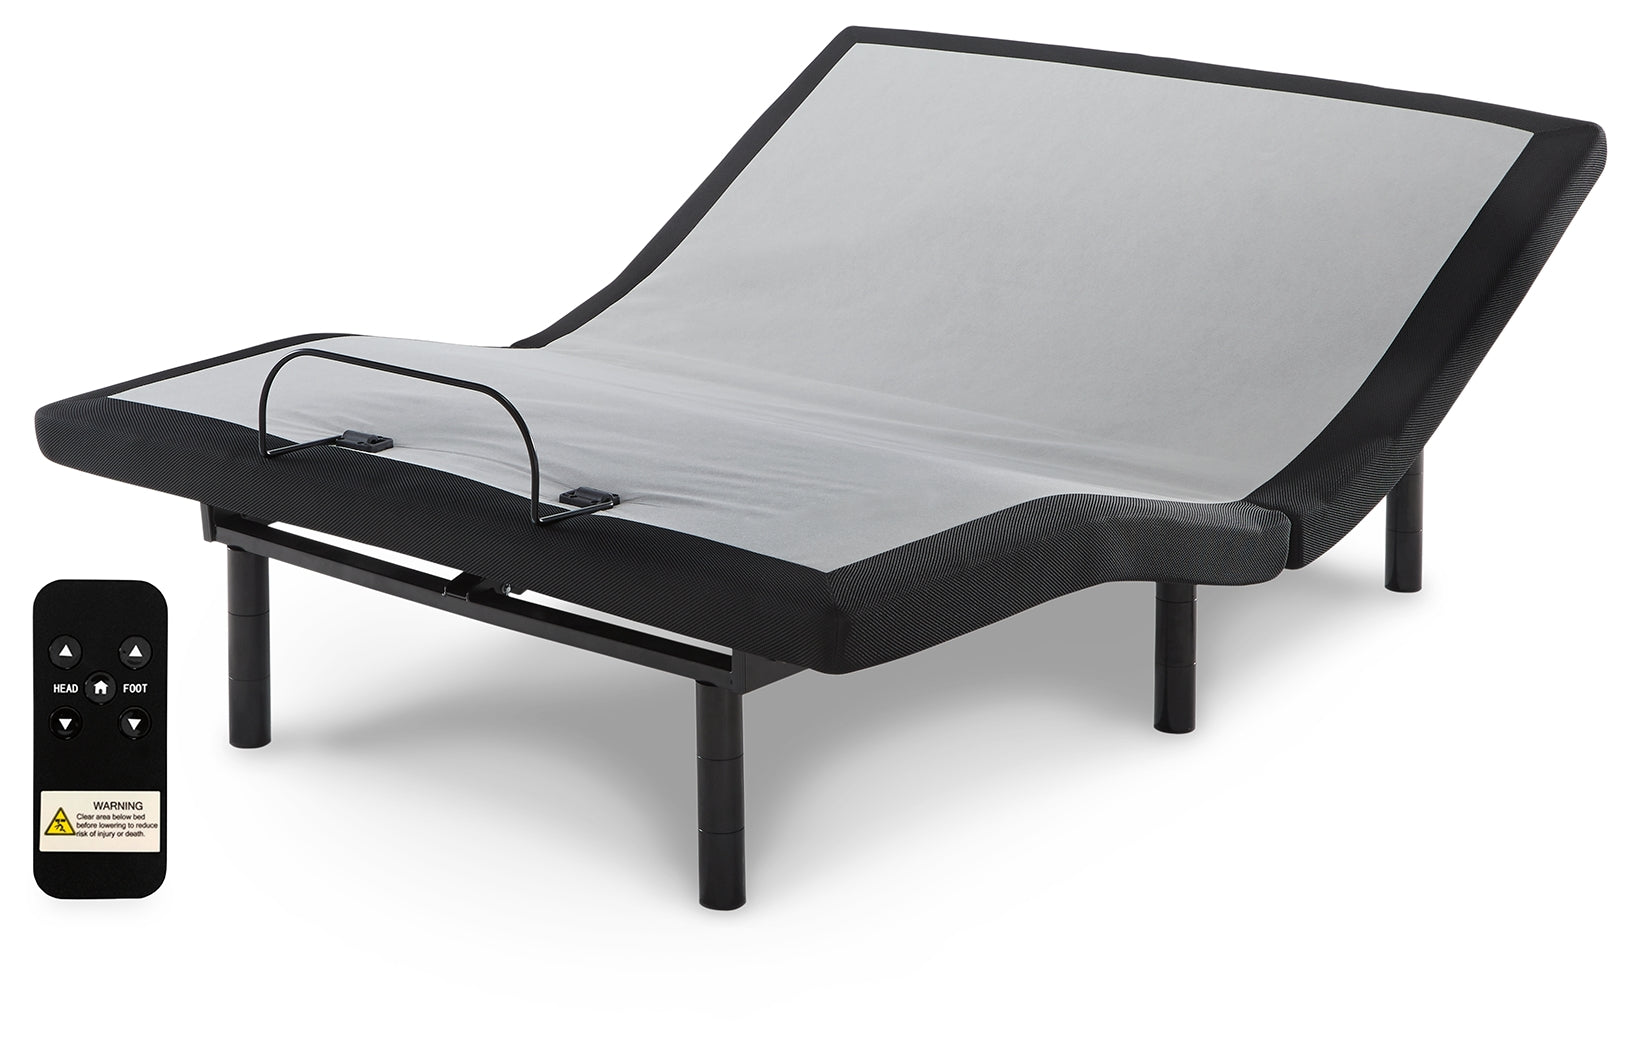 Hybrid 1600 King Mattress with Head-Foot Model-Good King Adjustable Base - furniture place usa